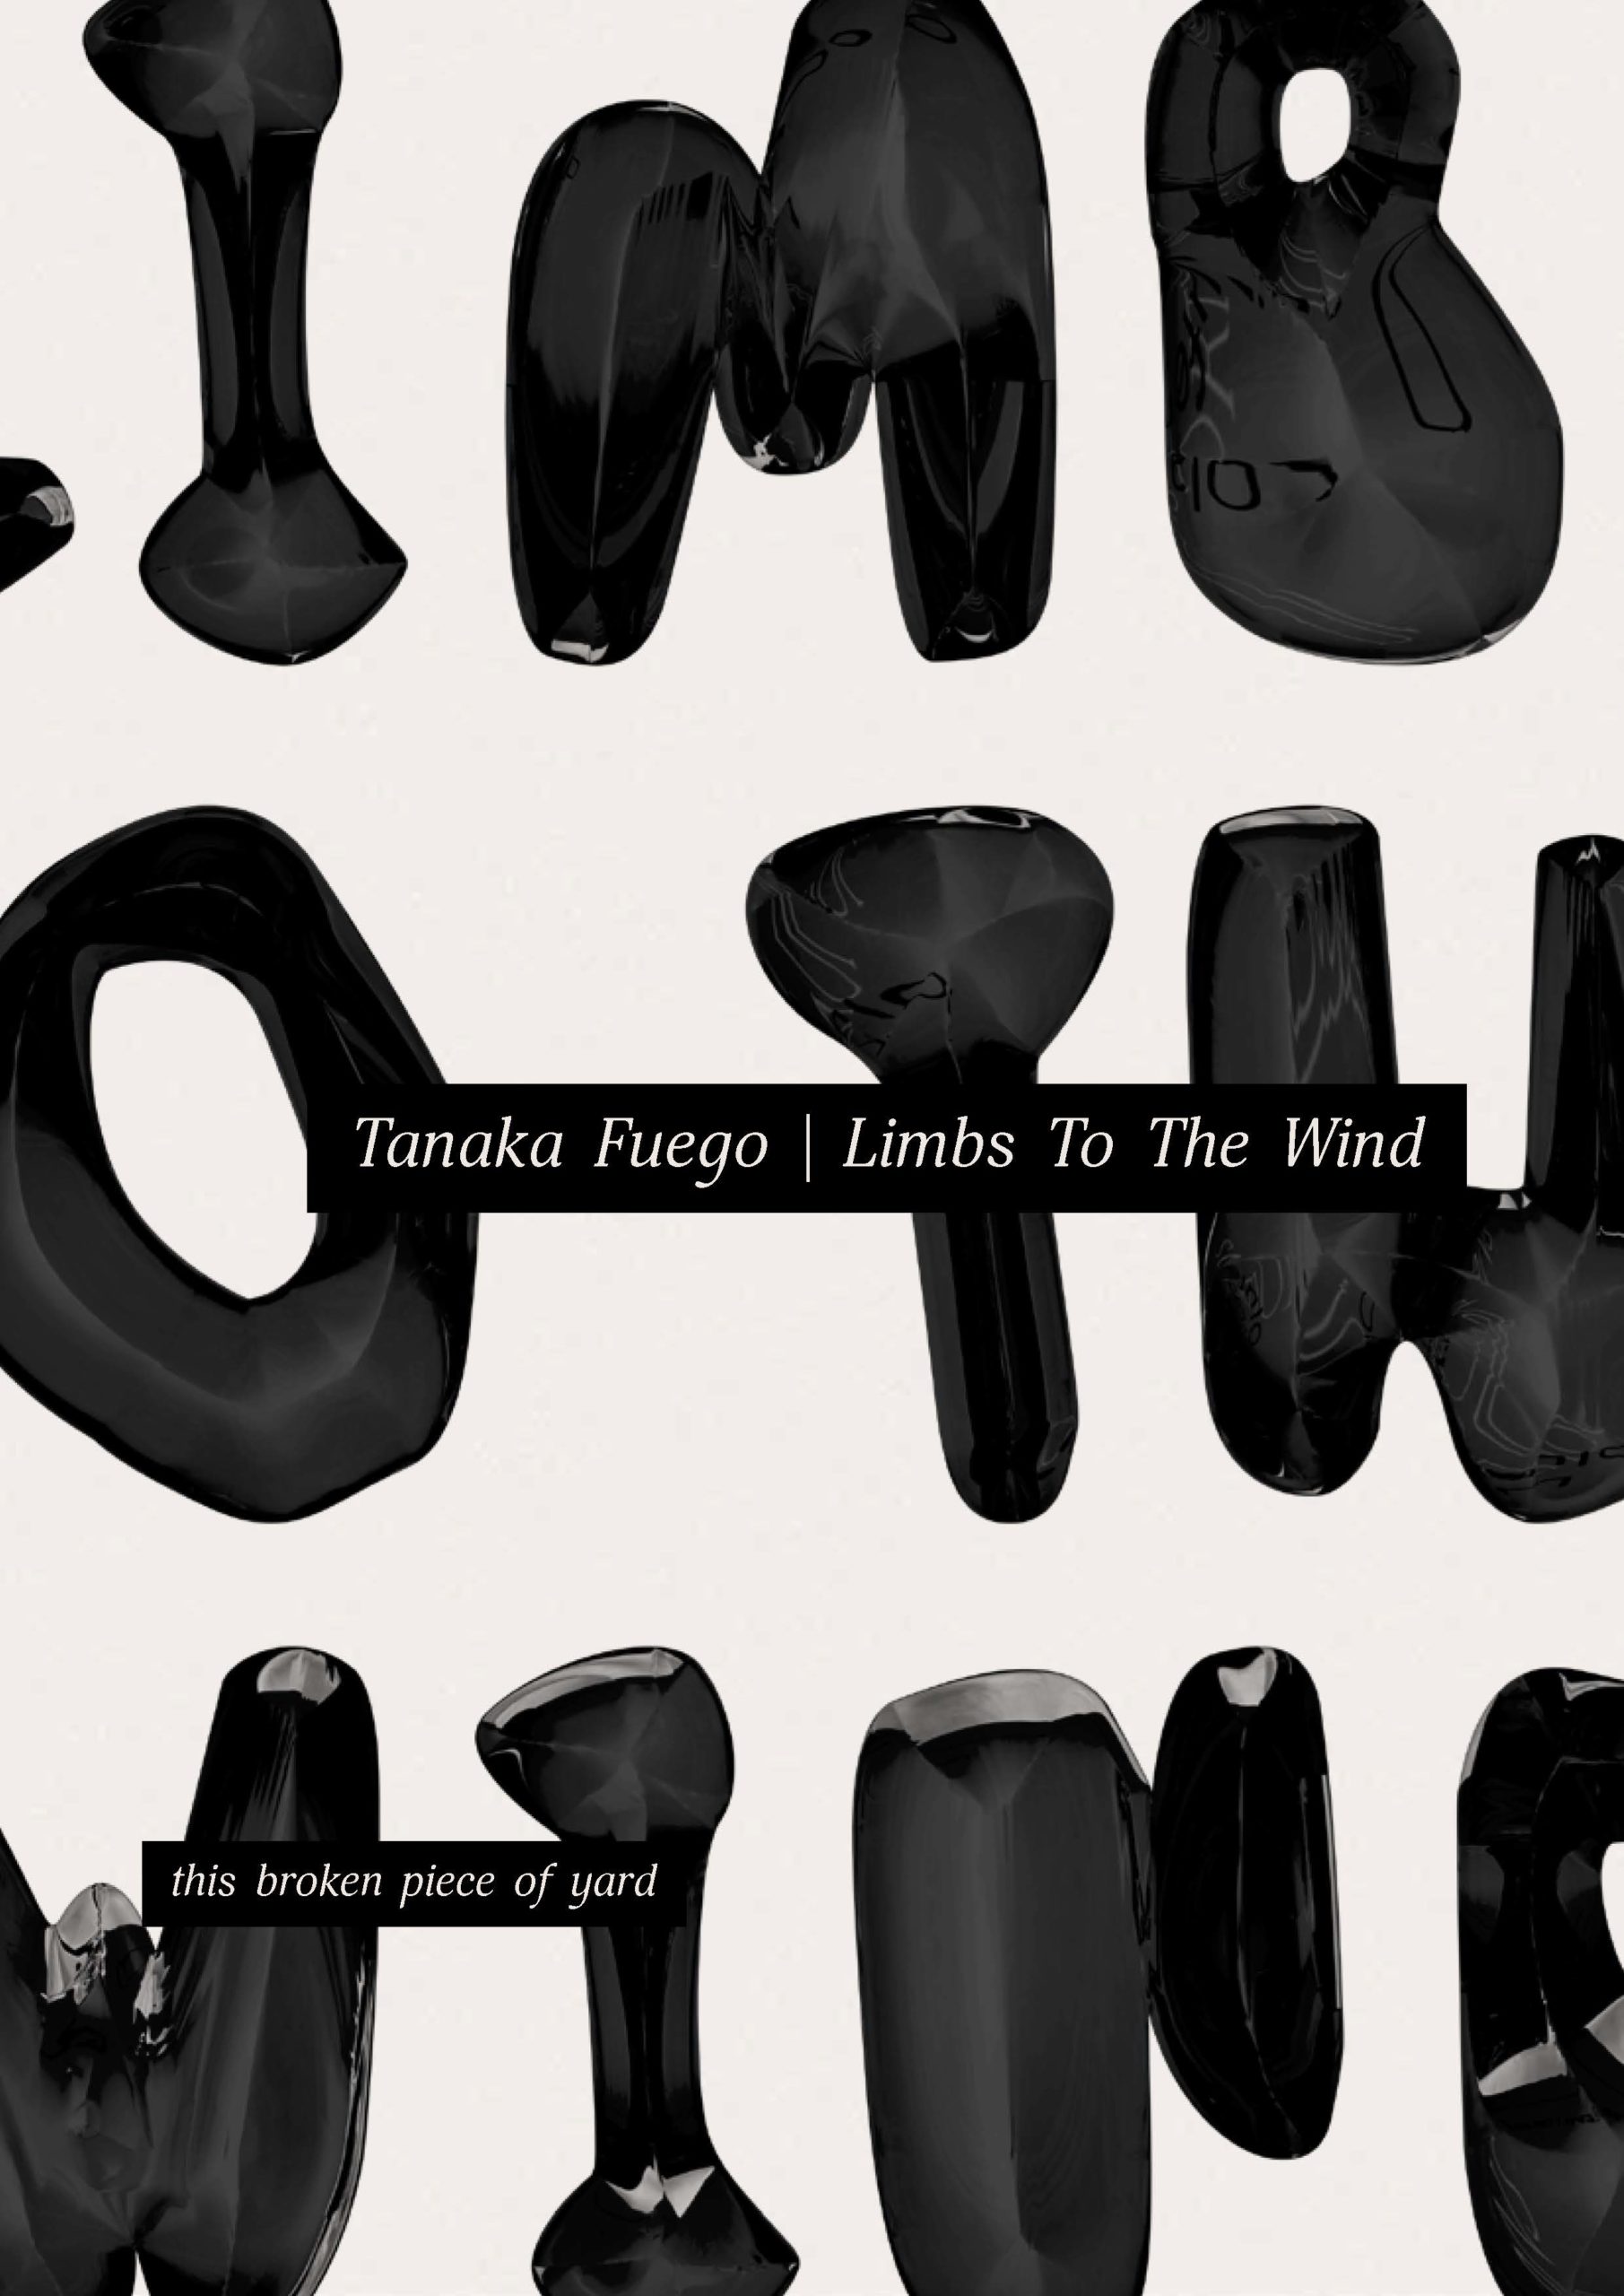 Alphabets are designed in black, three dimensional with erratically carved and shiny surfaces. At the center are captions “Tanaka Fuego, Limbs to the wind” and “this broken piece of yard” on the bottom left. 